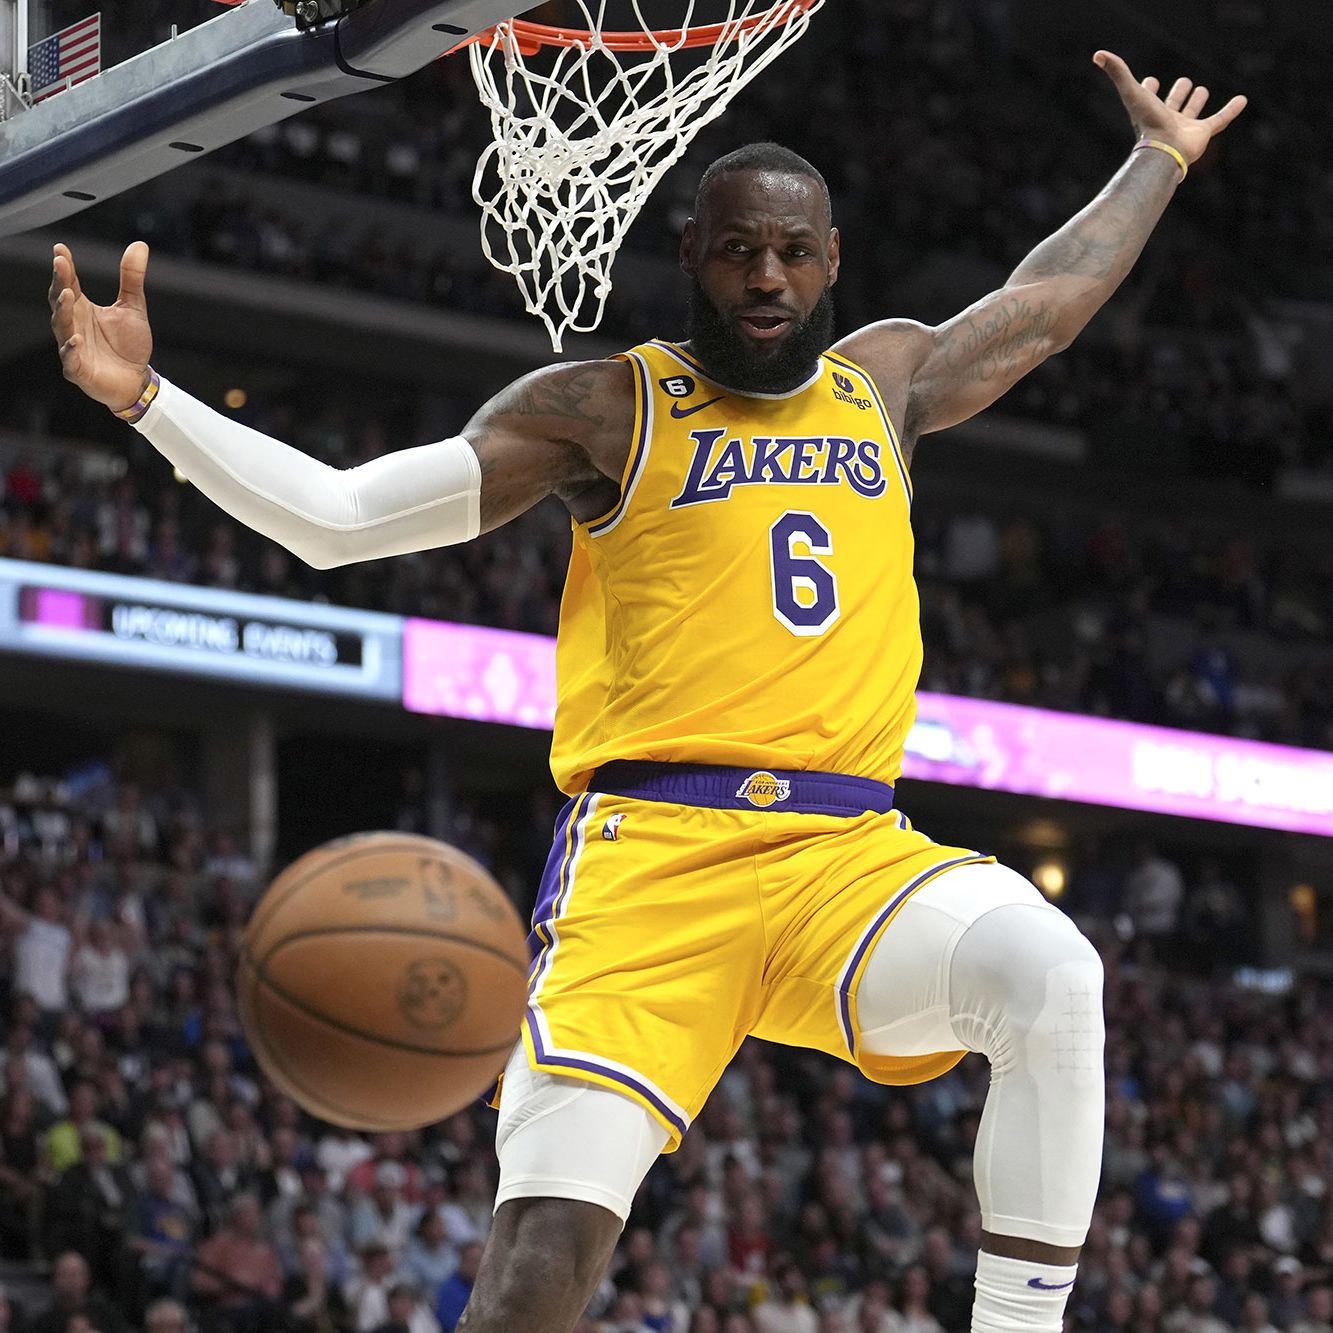 Lakers vs Nuggets Game 2: LeBron James proves he is human after missing an easy dunk in LA loss to Denver | CNN